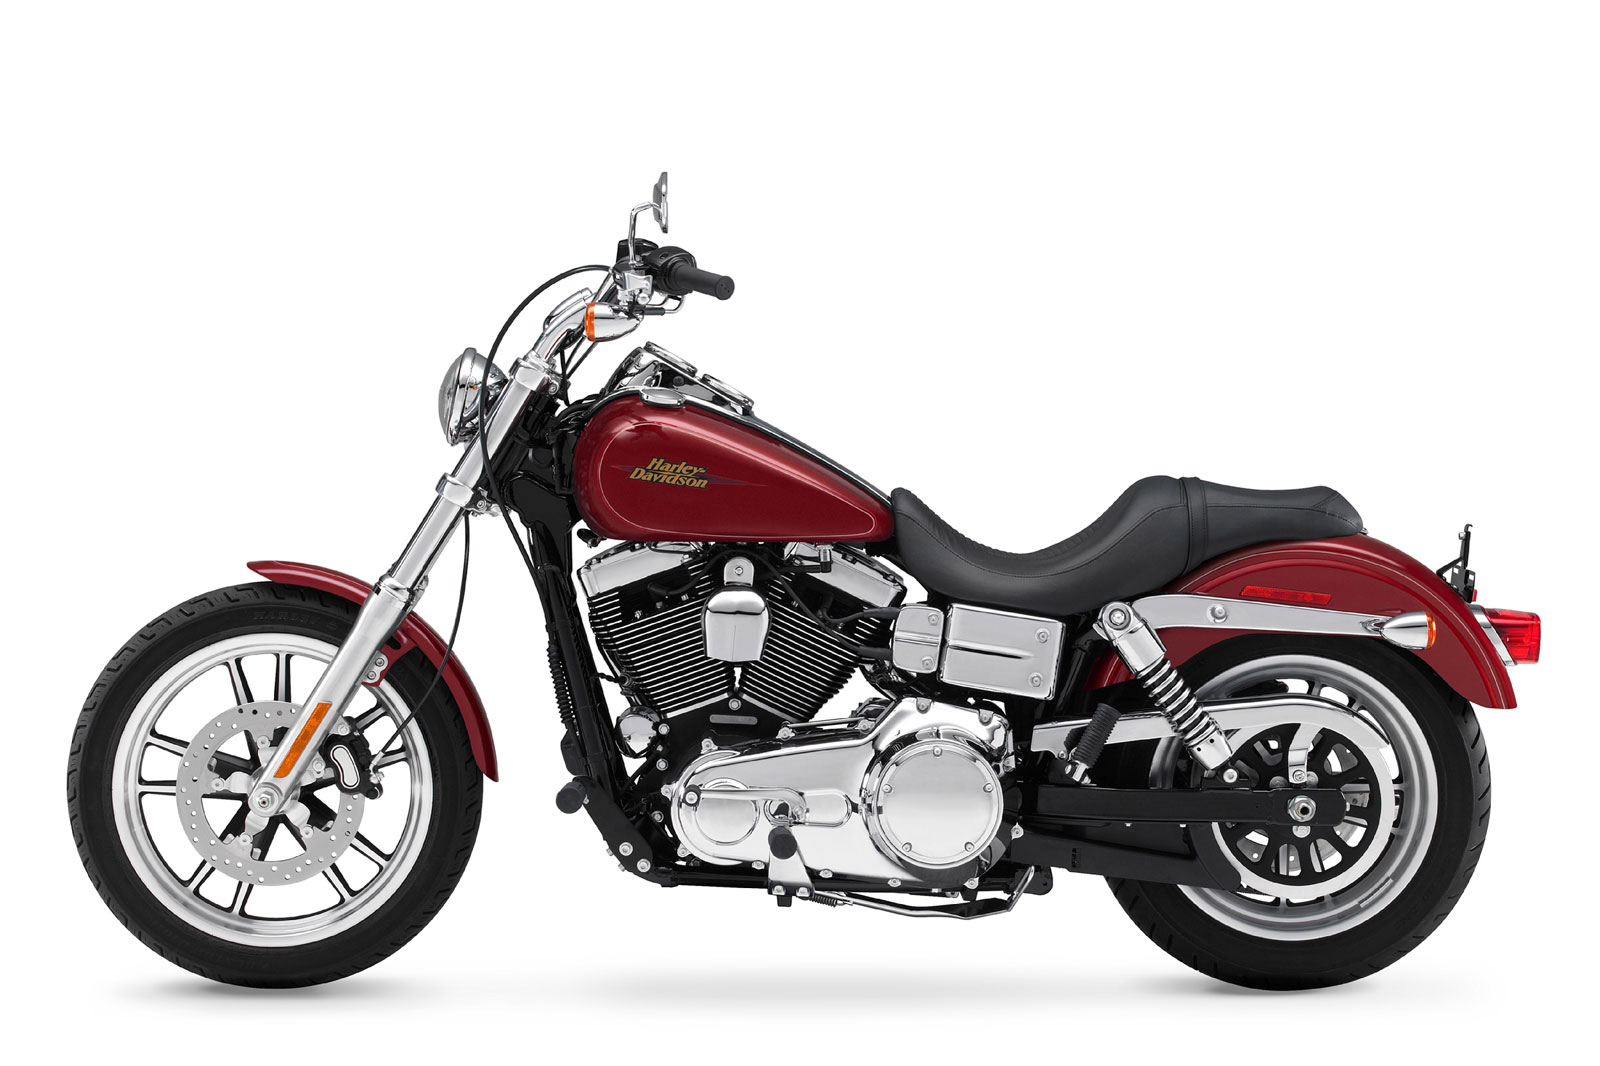 A Ride Aboard The 1999 Harley Davidson Fxds Dyna Convertible Motorcycle Cruiser